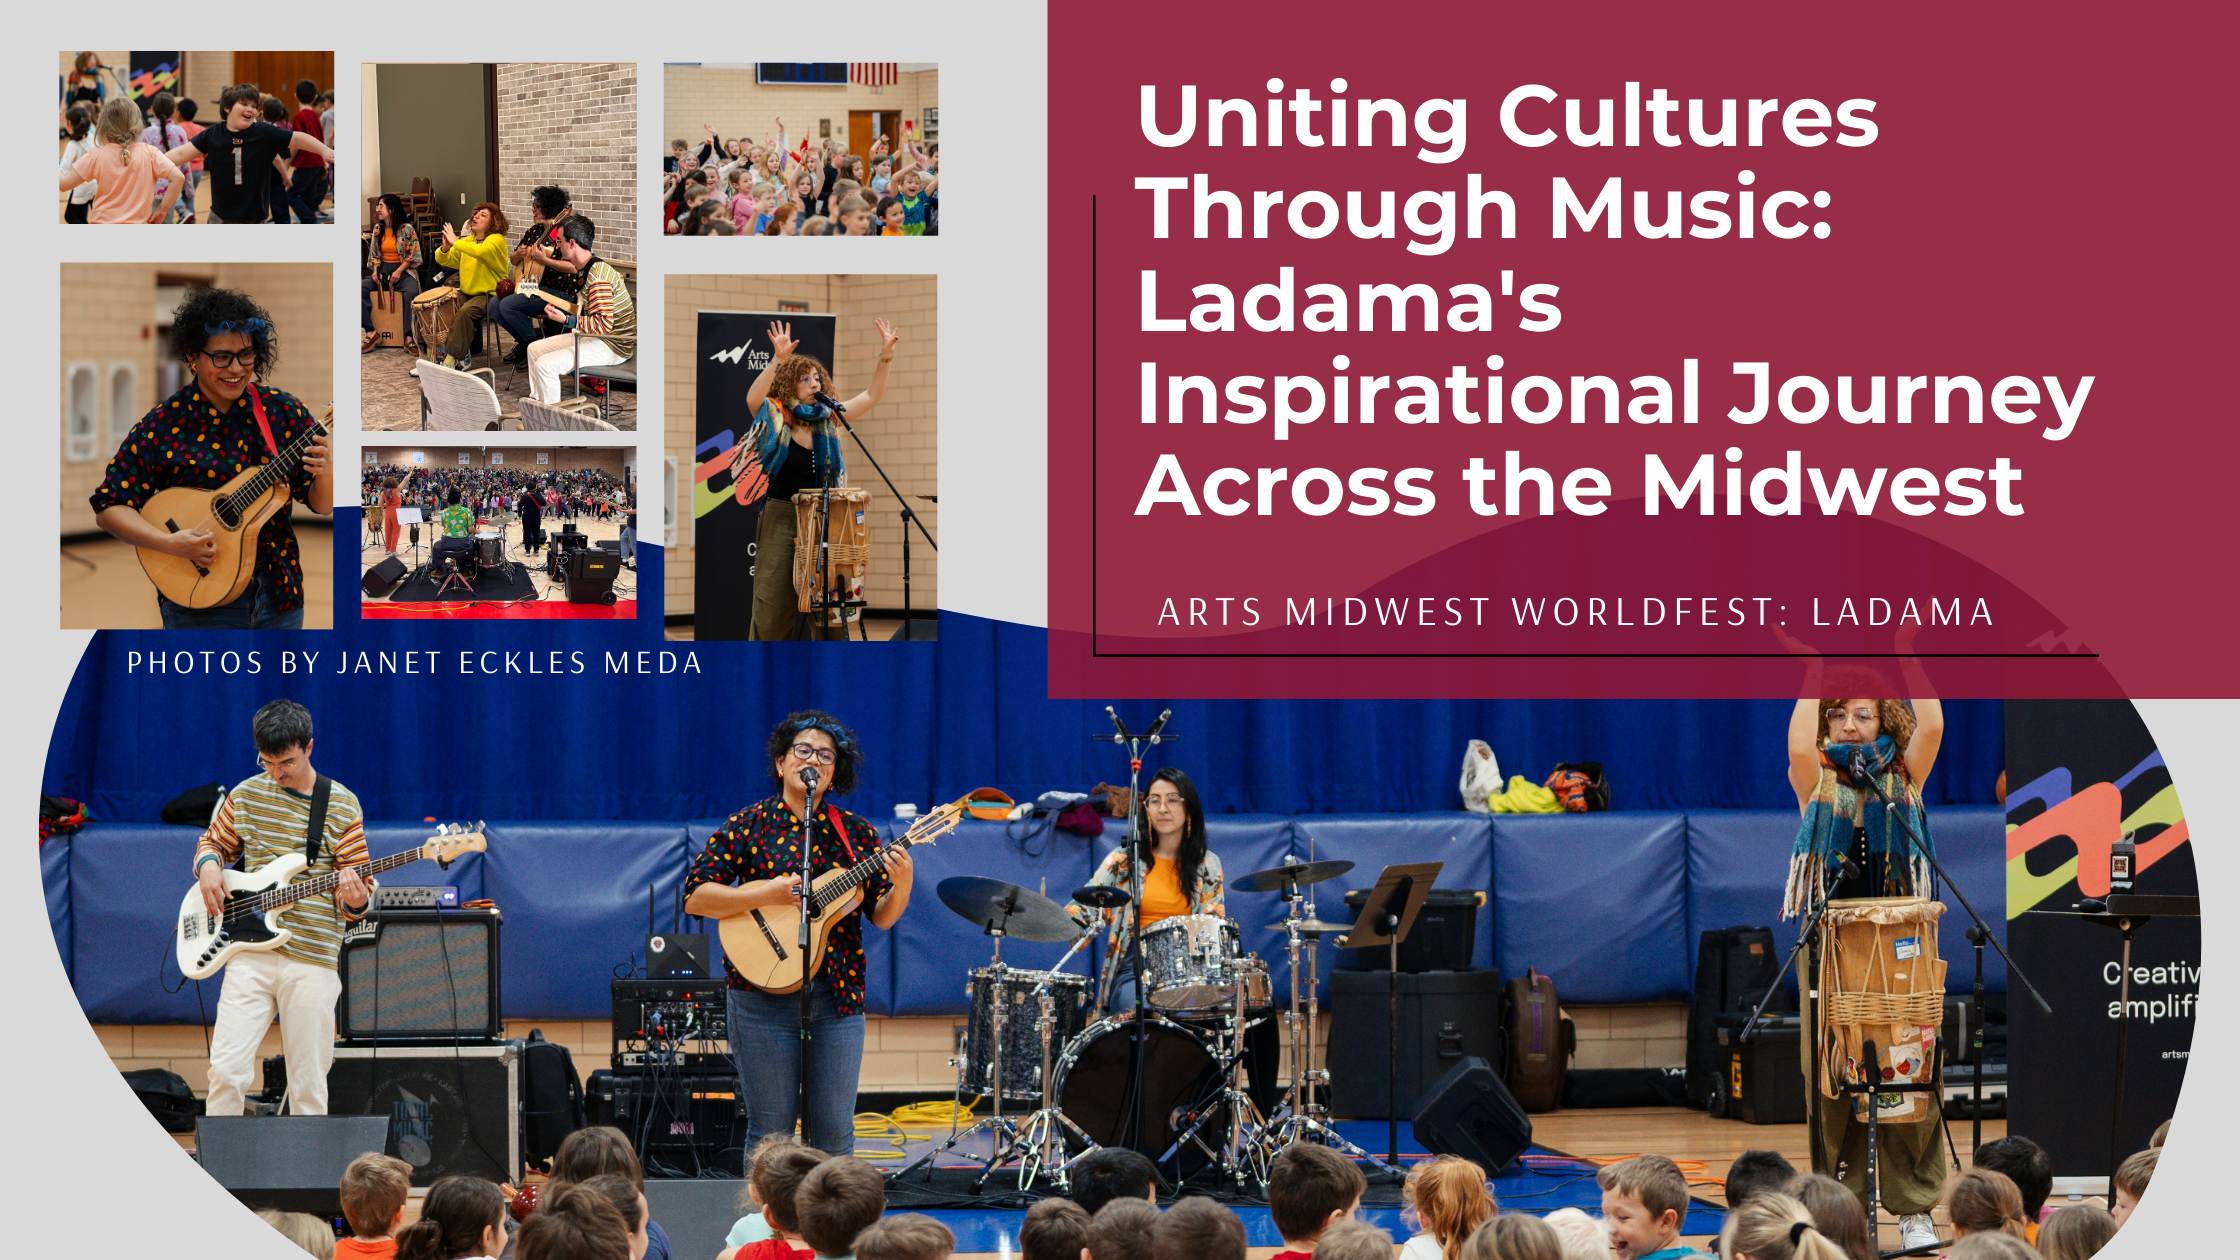 Uniting Cultures Through Music: Ladama's Inspirational Journey Across the Midwest<br />
Arts Midwest Worldfest: Ladama